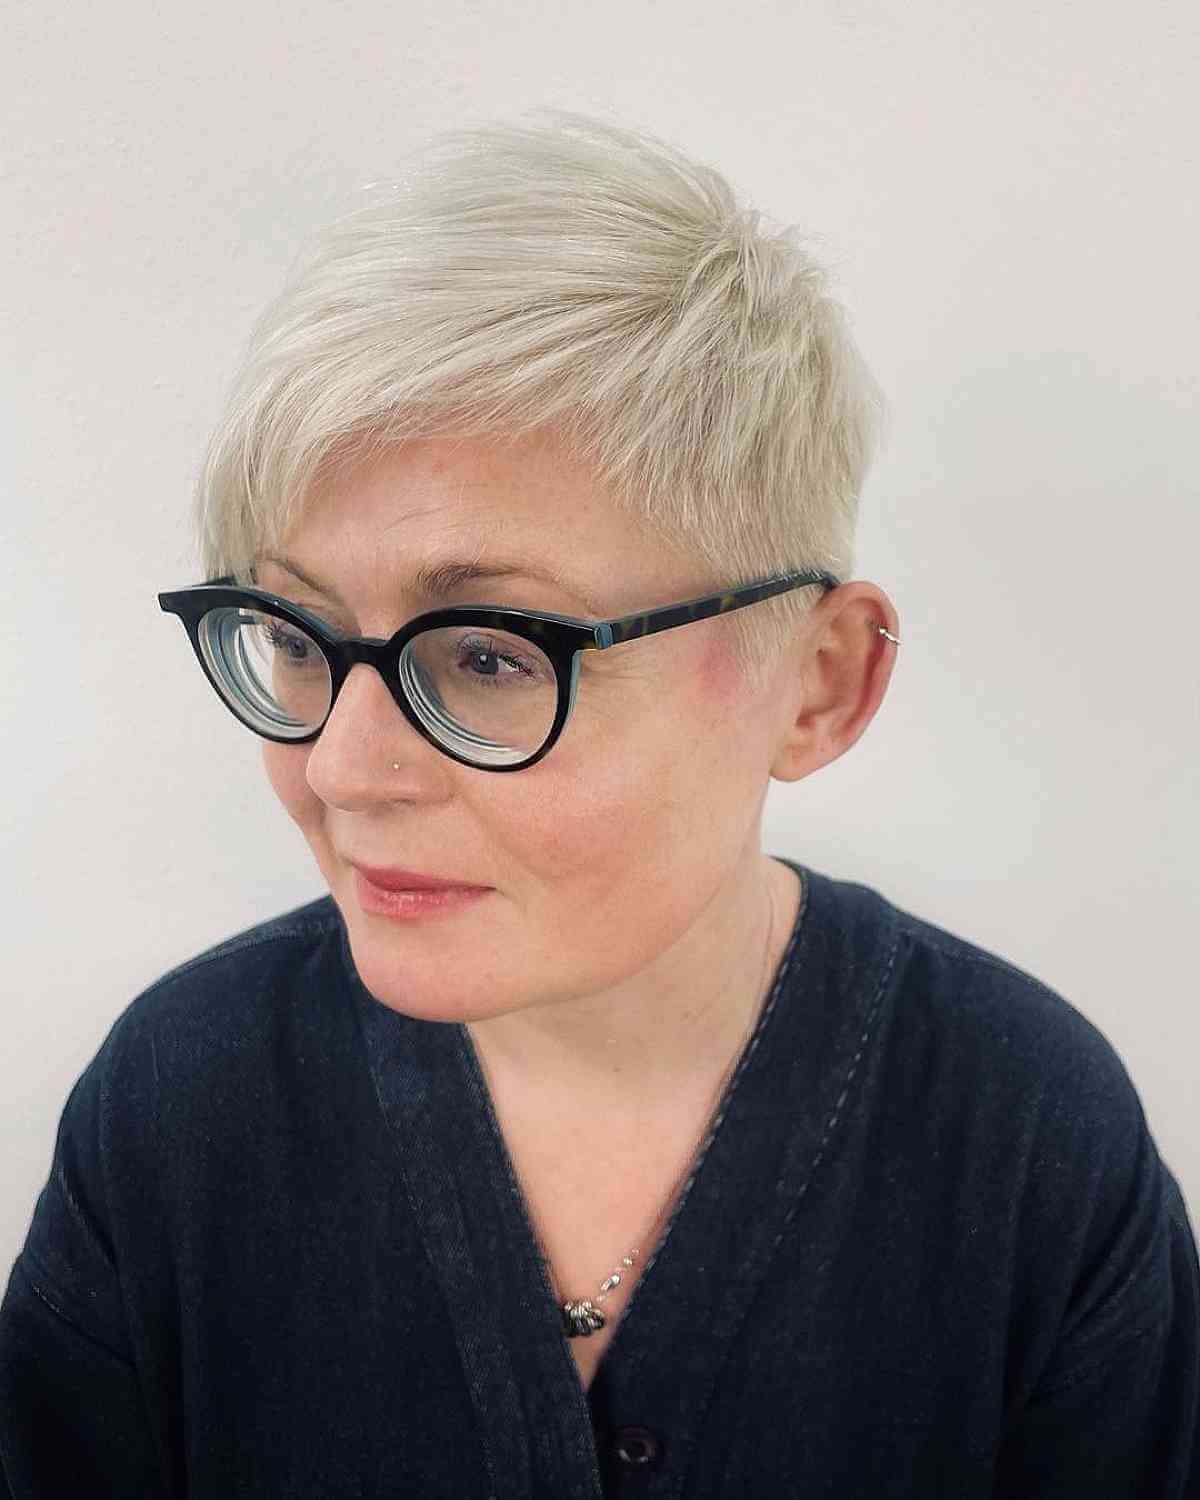 Short Textured Pixie With Long Side Bangs and Glasses